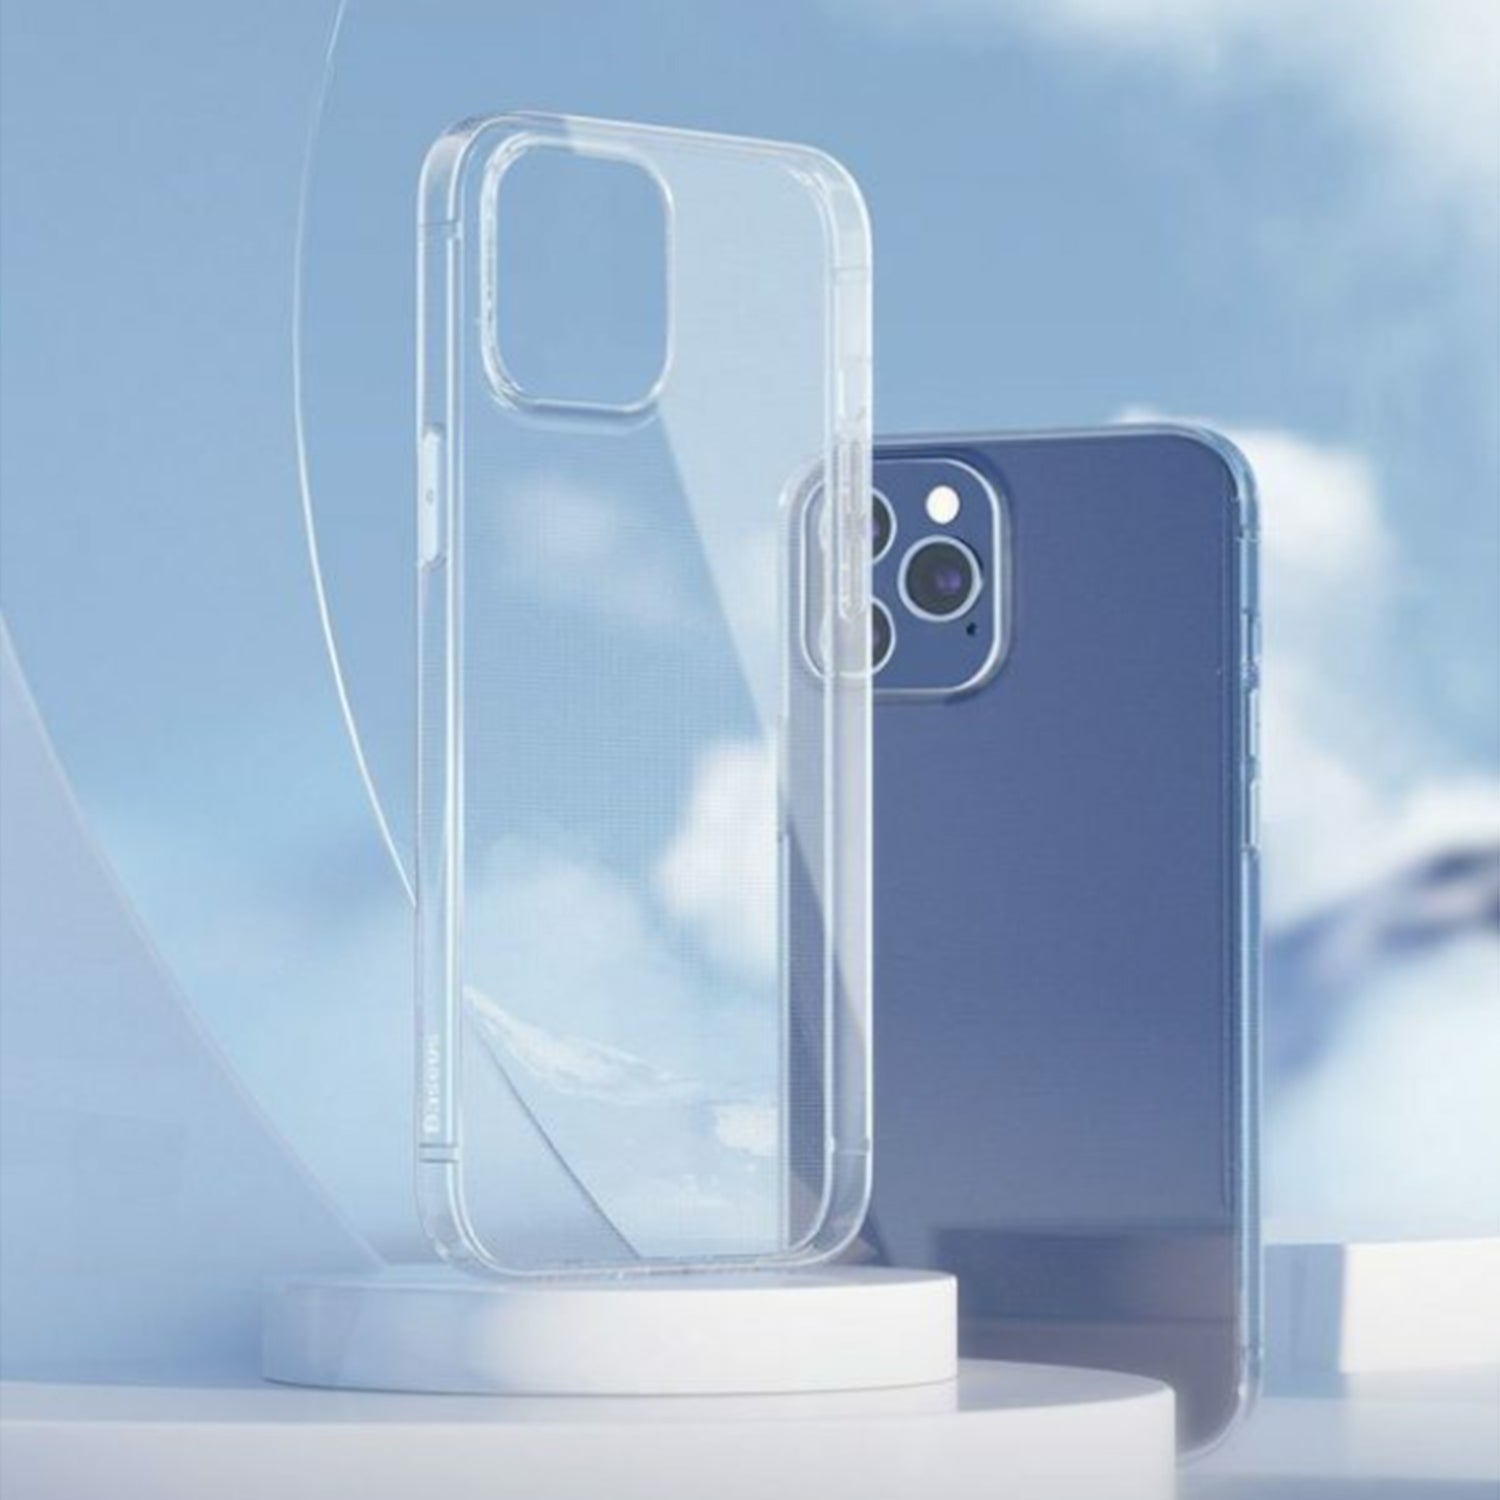 Transparent Clear Soft TPU Cover Case for iPhone 12 Pro Max (6.7")